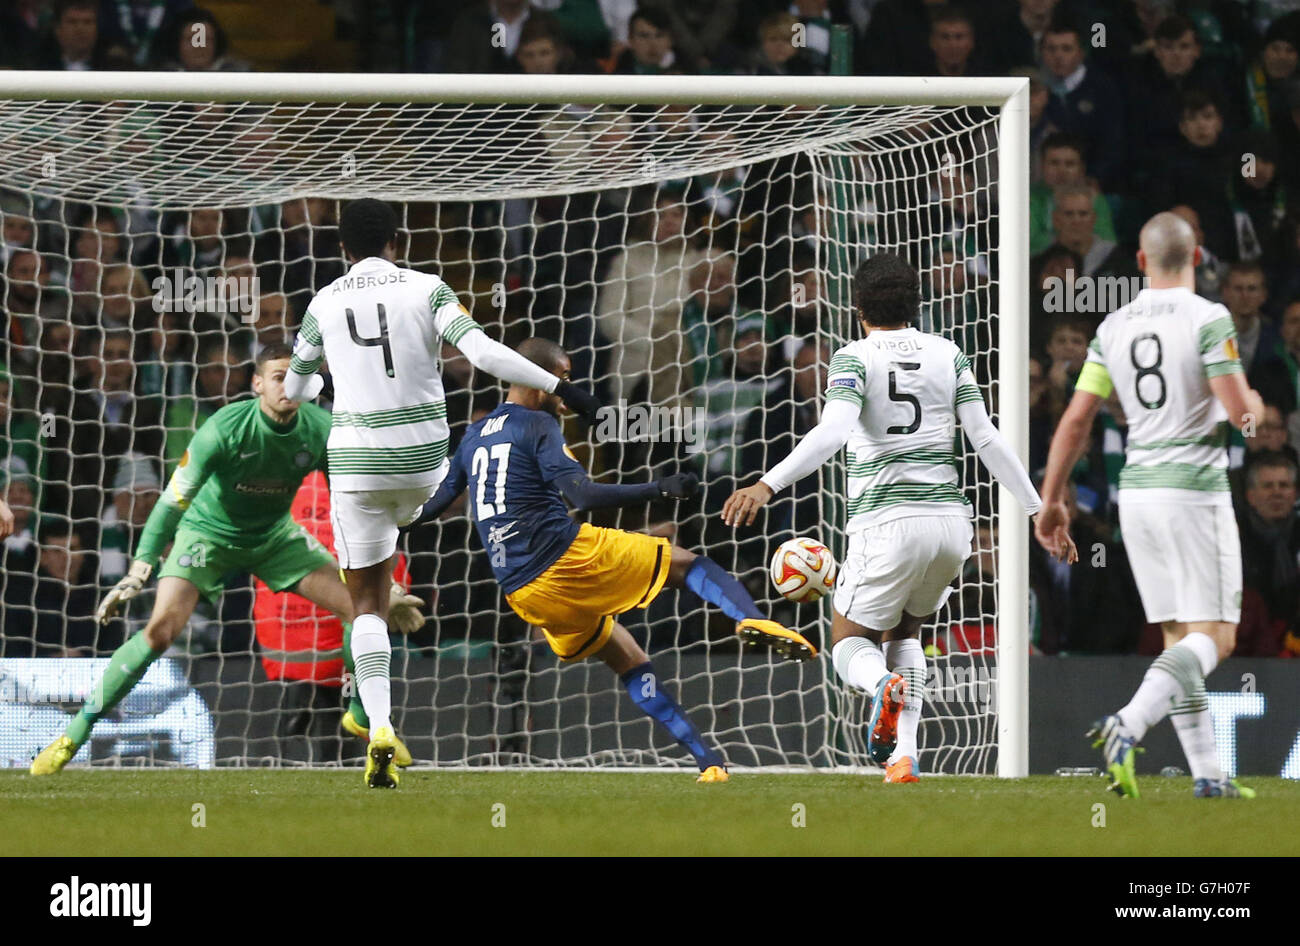 FC Salzburg's Alan scores his first goal during the UEFA Europa League match at Celtic Park, Glasgow. Stock Photo